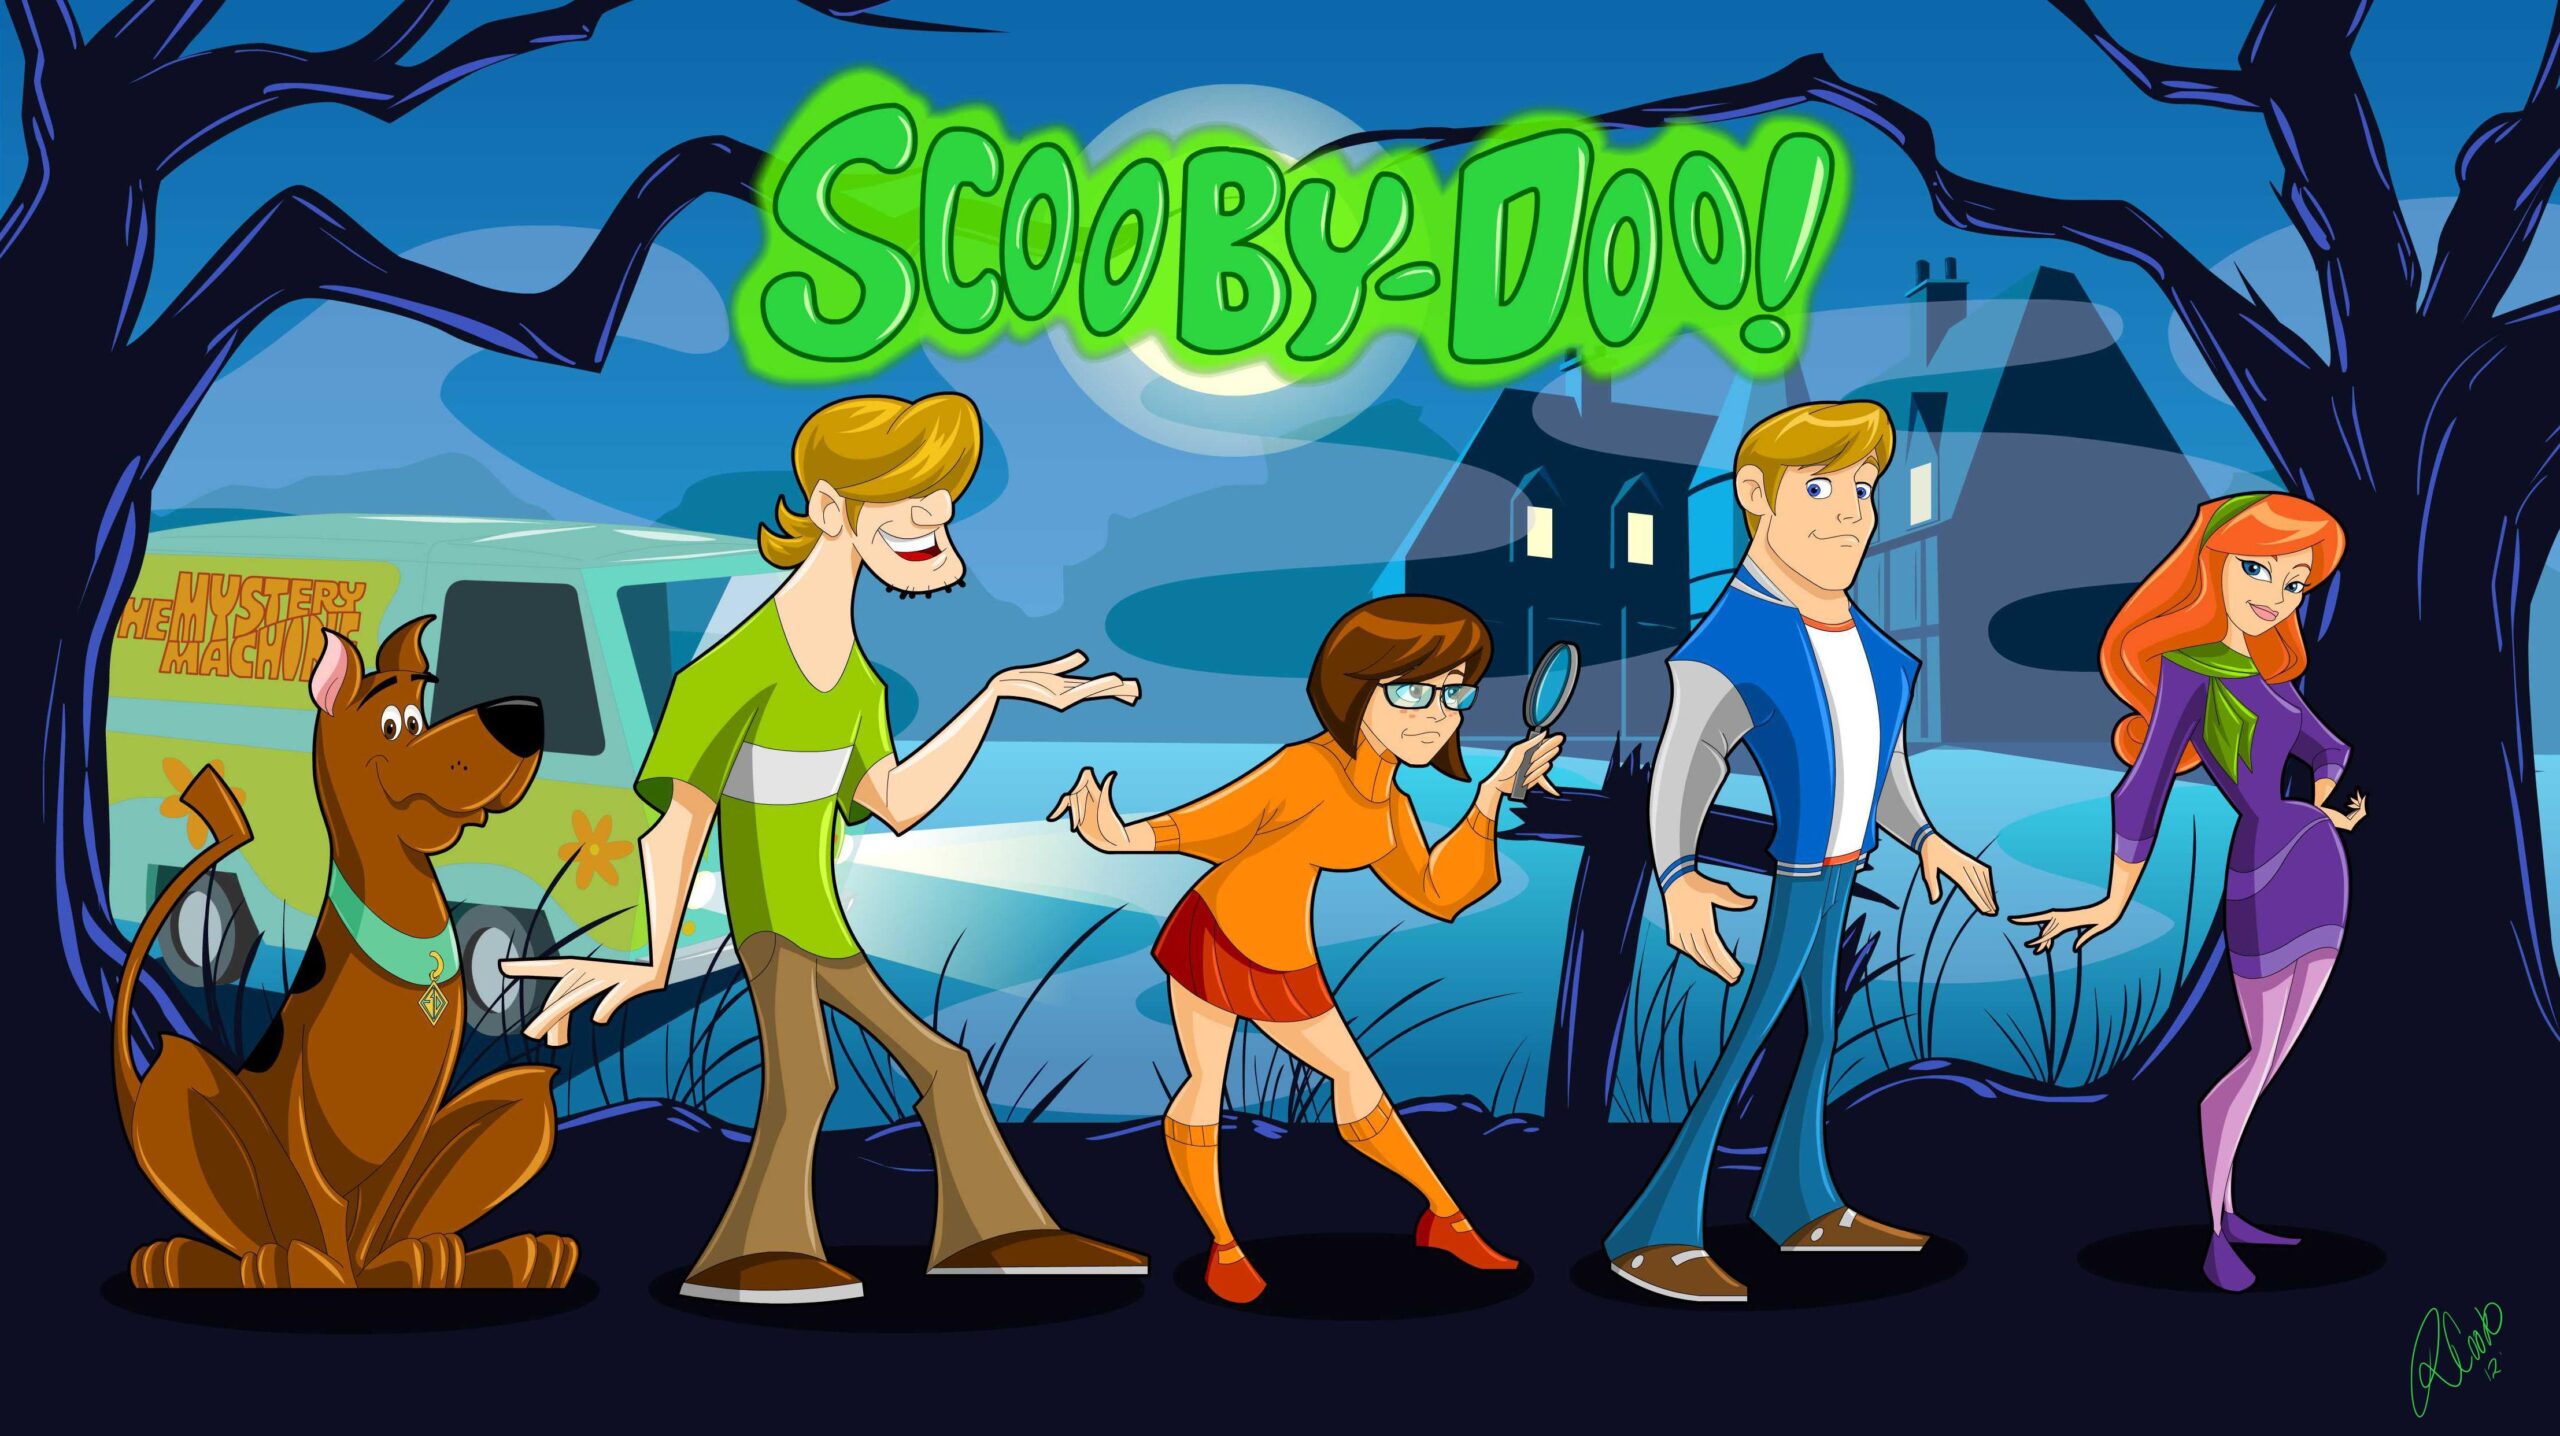 Scooby Doo Gang Shaded Final Cartoon 2K Wallpaper for HTC One M